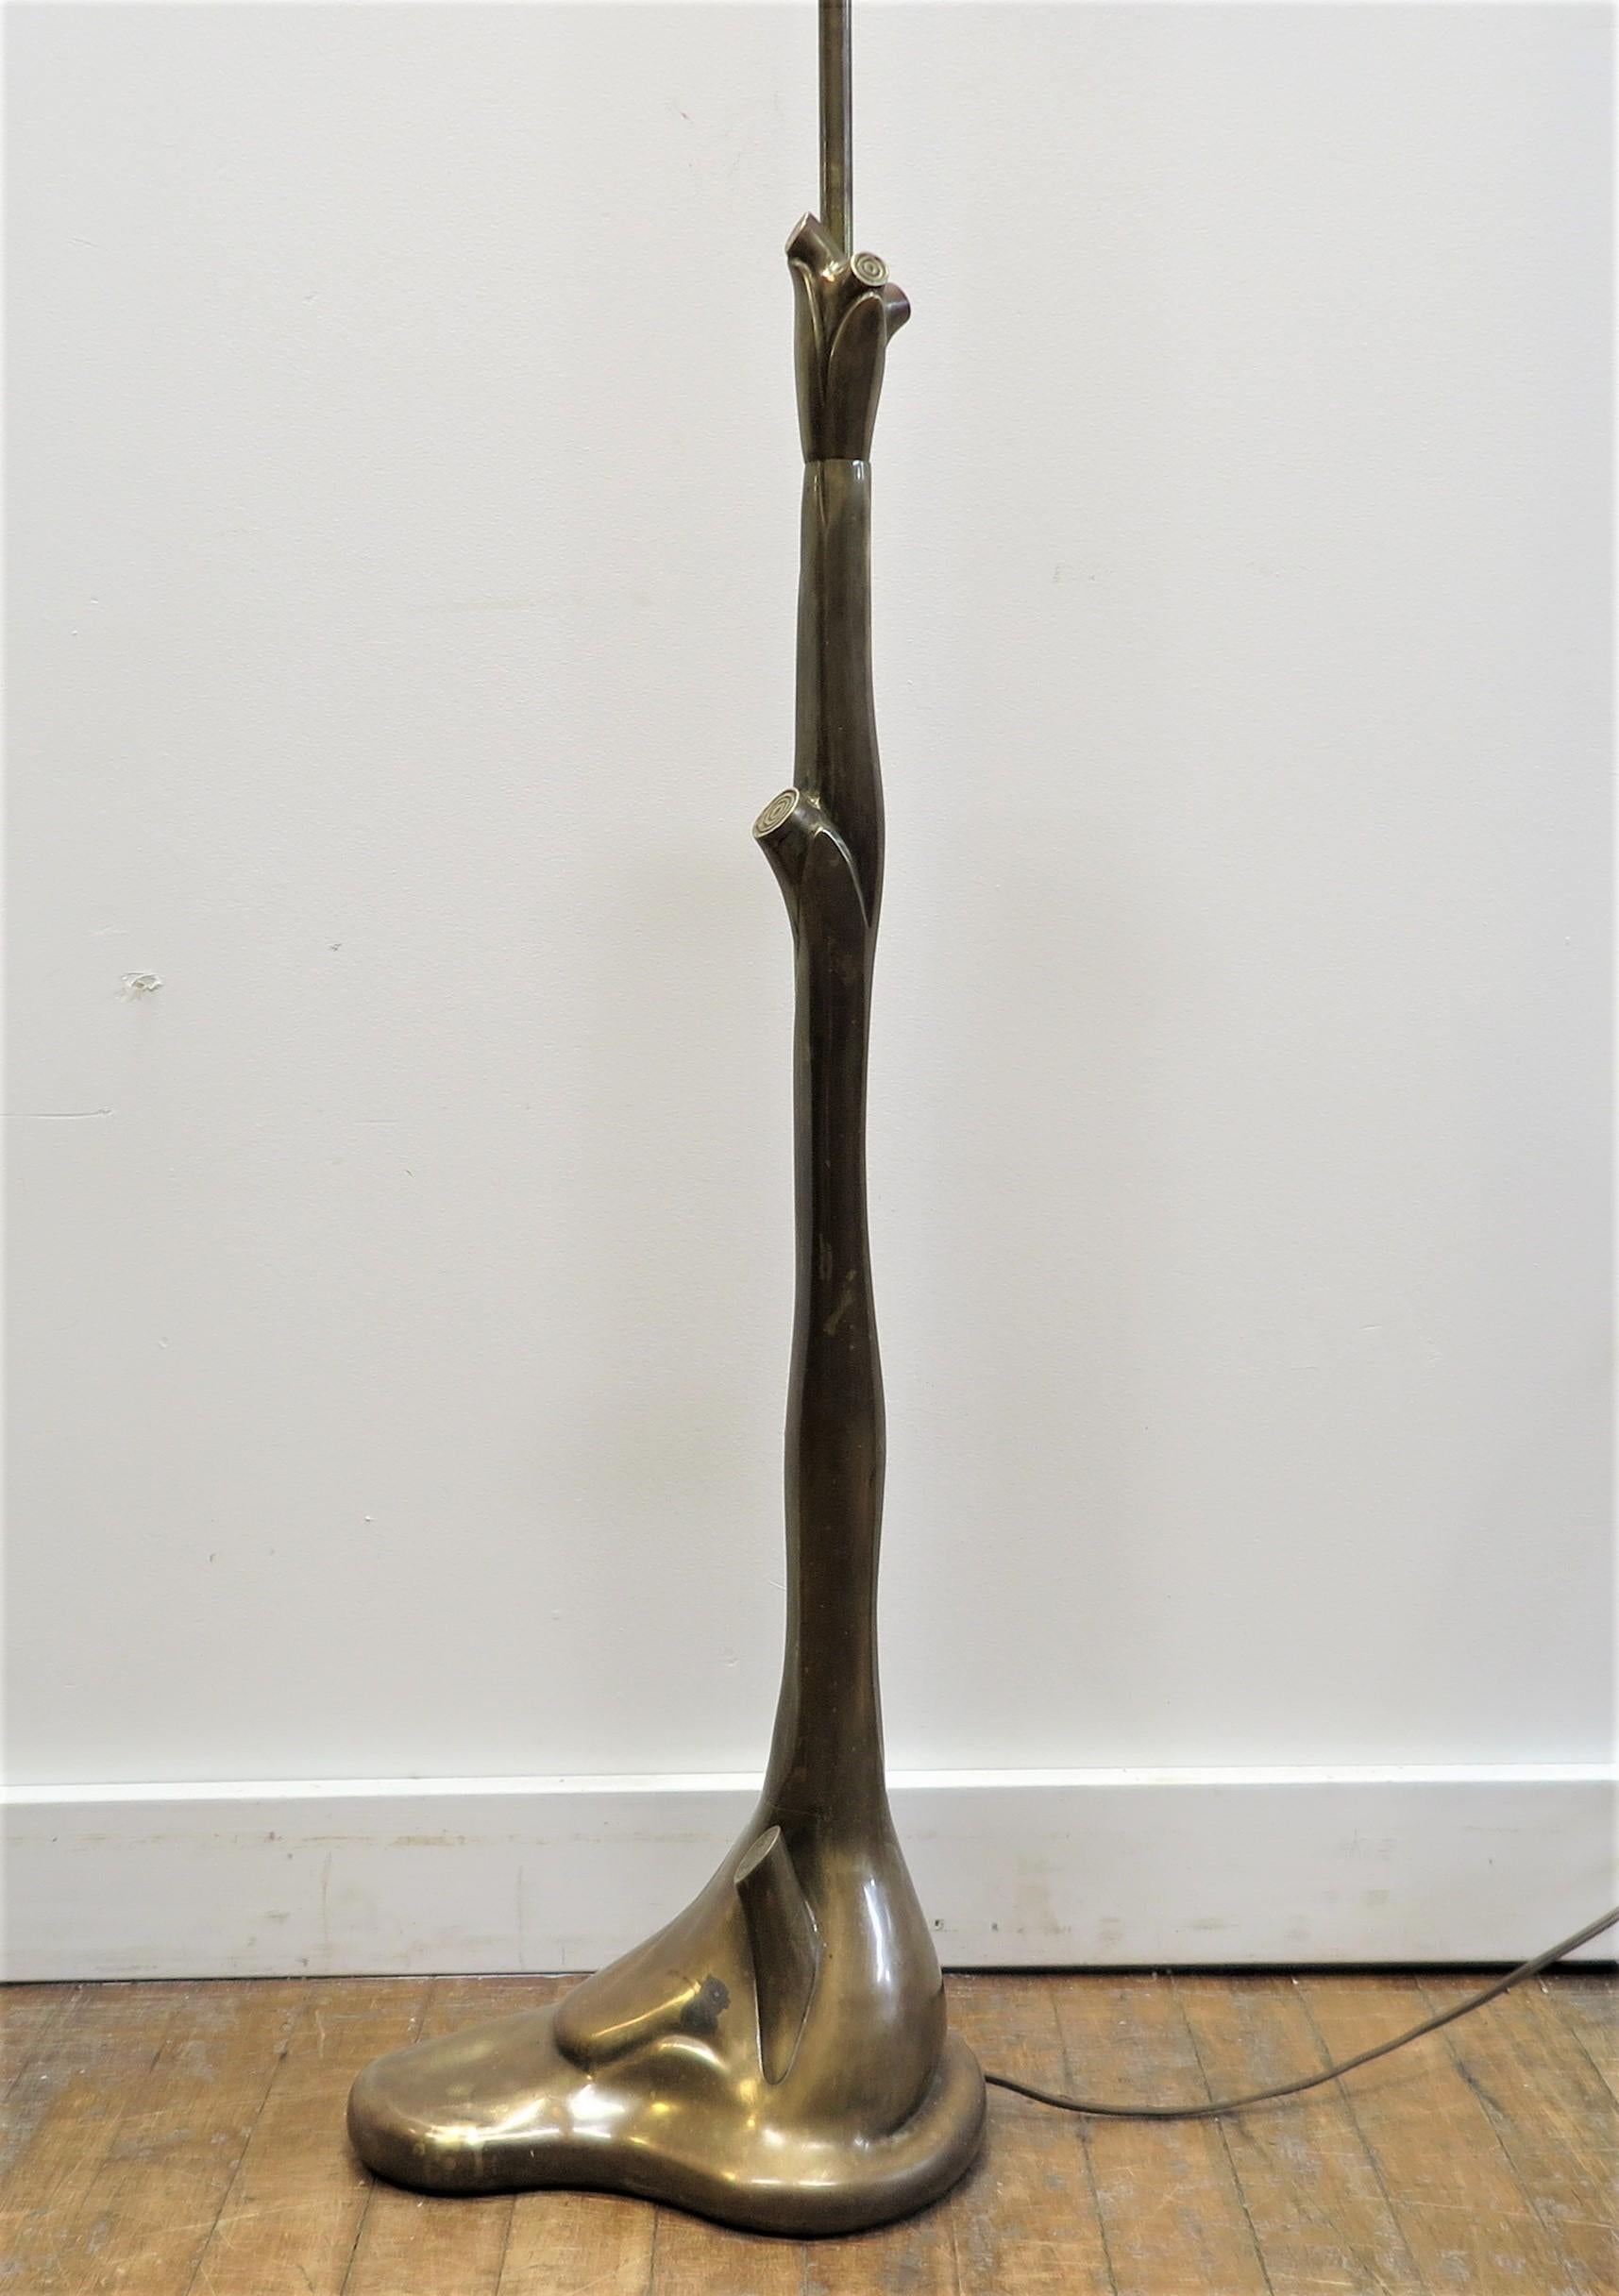 Chapman Brass floor lamp Faux Bois.  Rare Chapman Faux Bois Floor lamp.  Beautiful design reminiscent of Art Nouveau style.  Articulating up, down with 360 rotation movement of the pole.  Entire piece is made of solid brass beautifully patinated.  